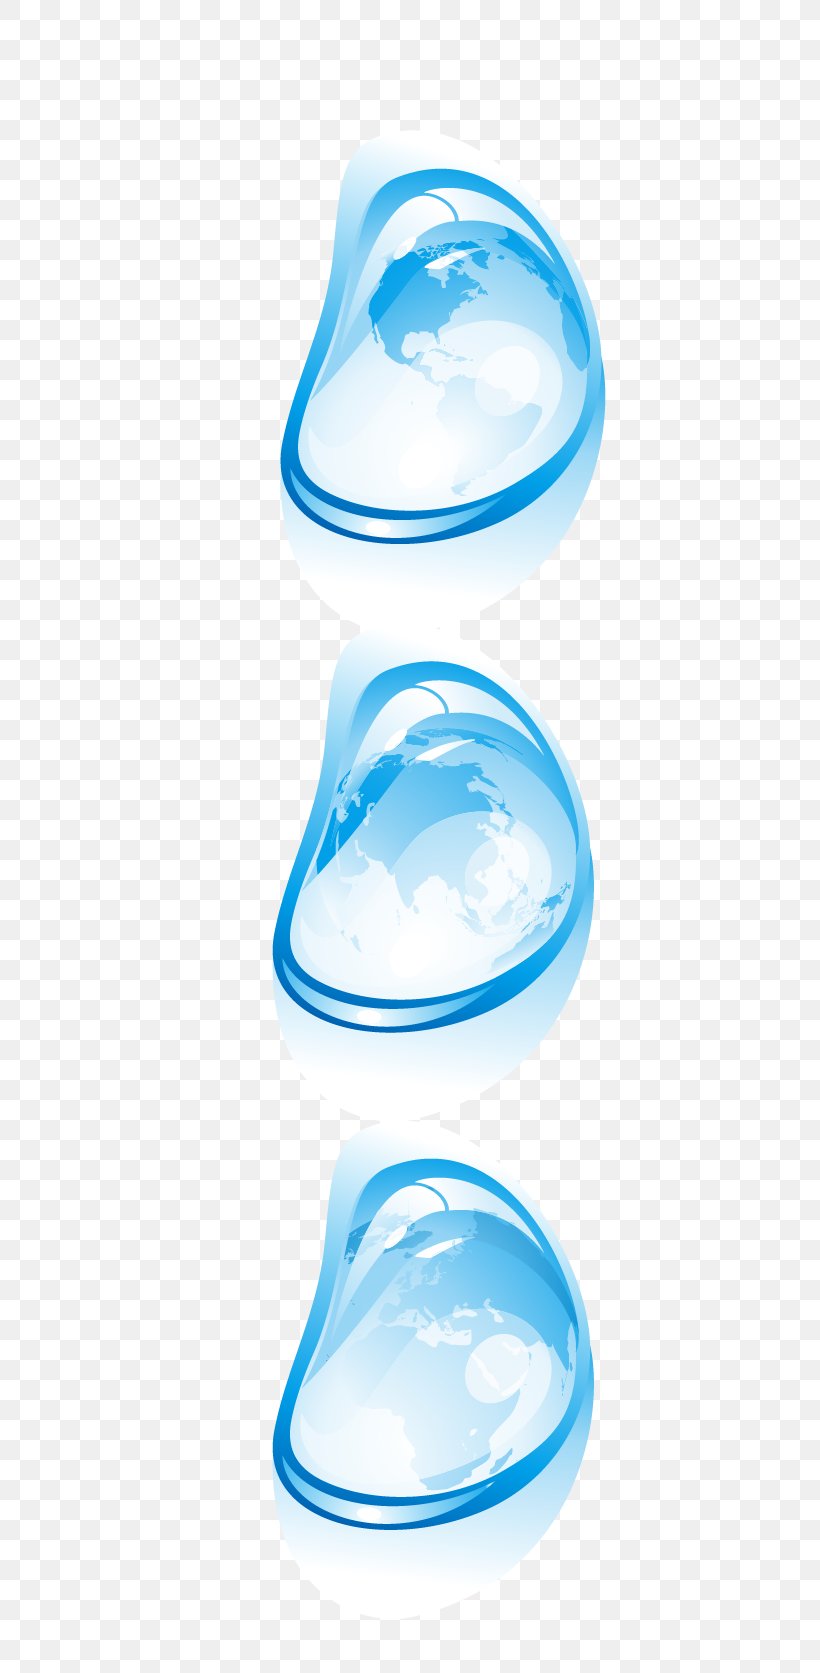 Earth Drop Euclidean Vector Water, PNG, 641x1673px, Earth, Dew, Drop, Liquid, Silhouette Download Free